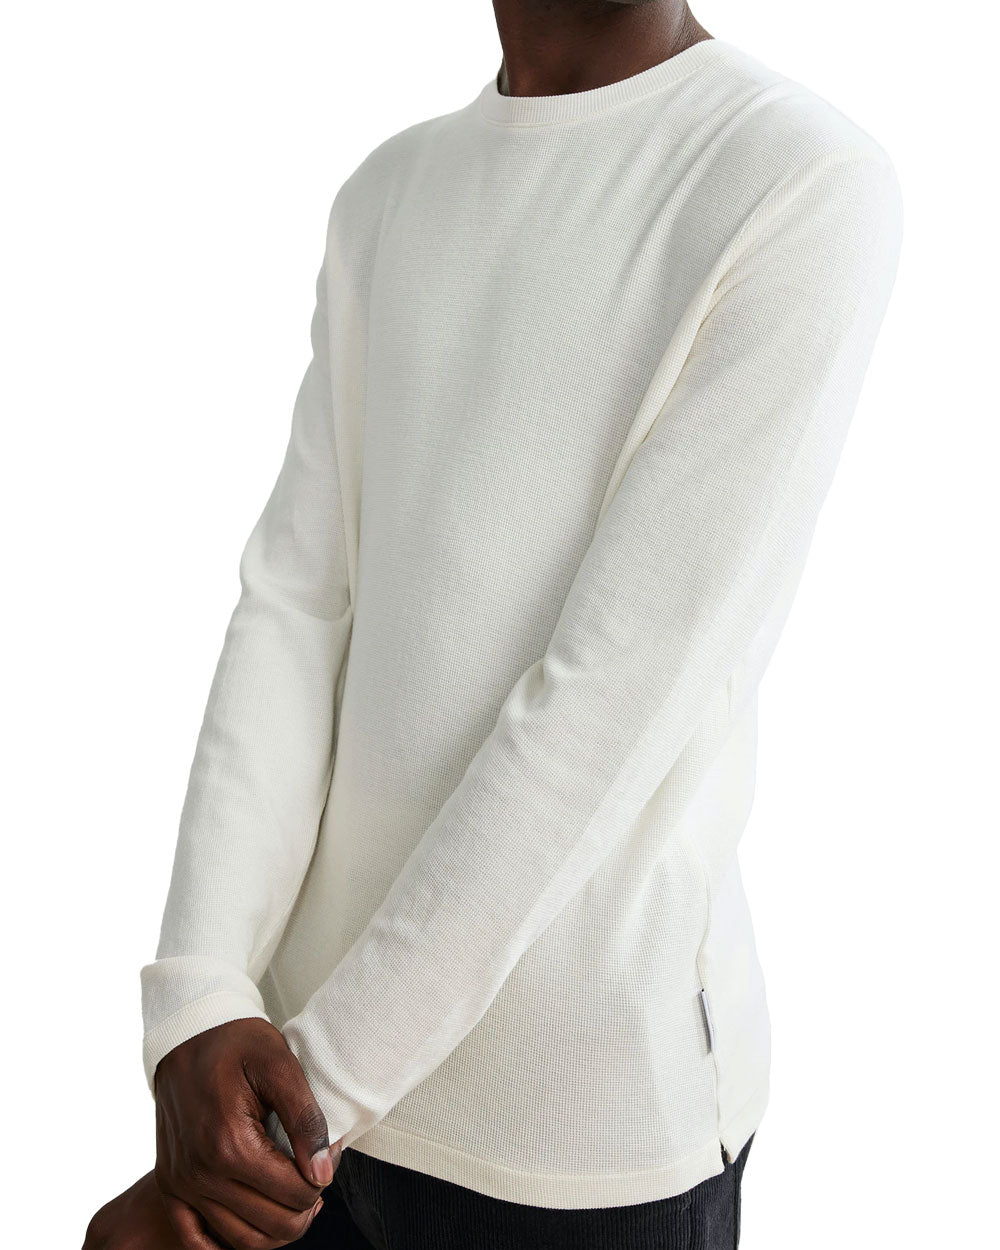 Off-White Cotton Blend Long Sleeve Tee